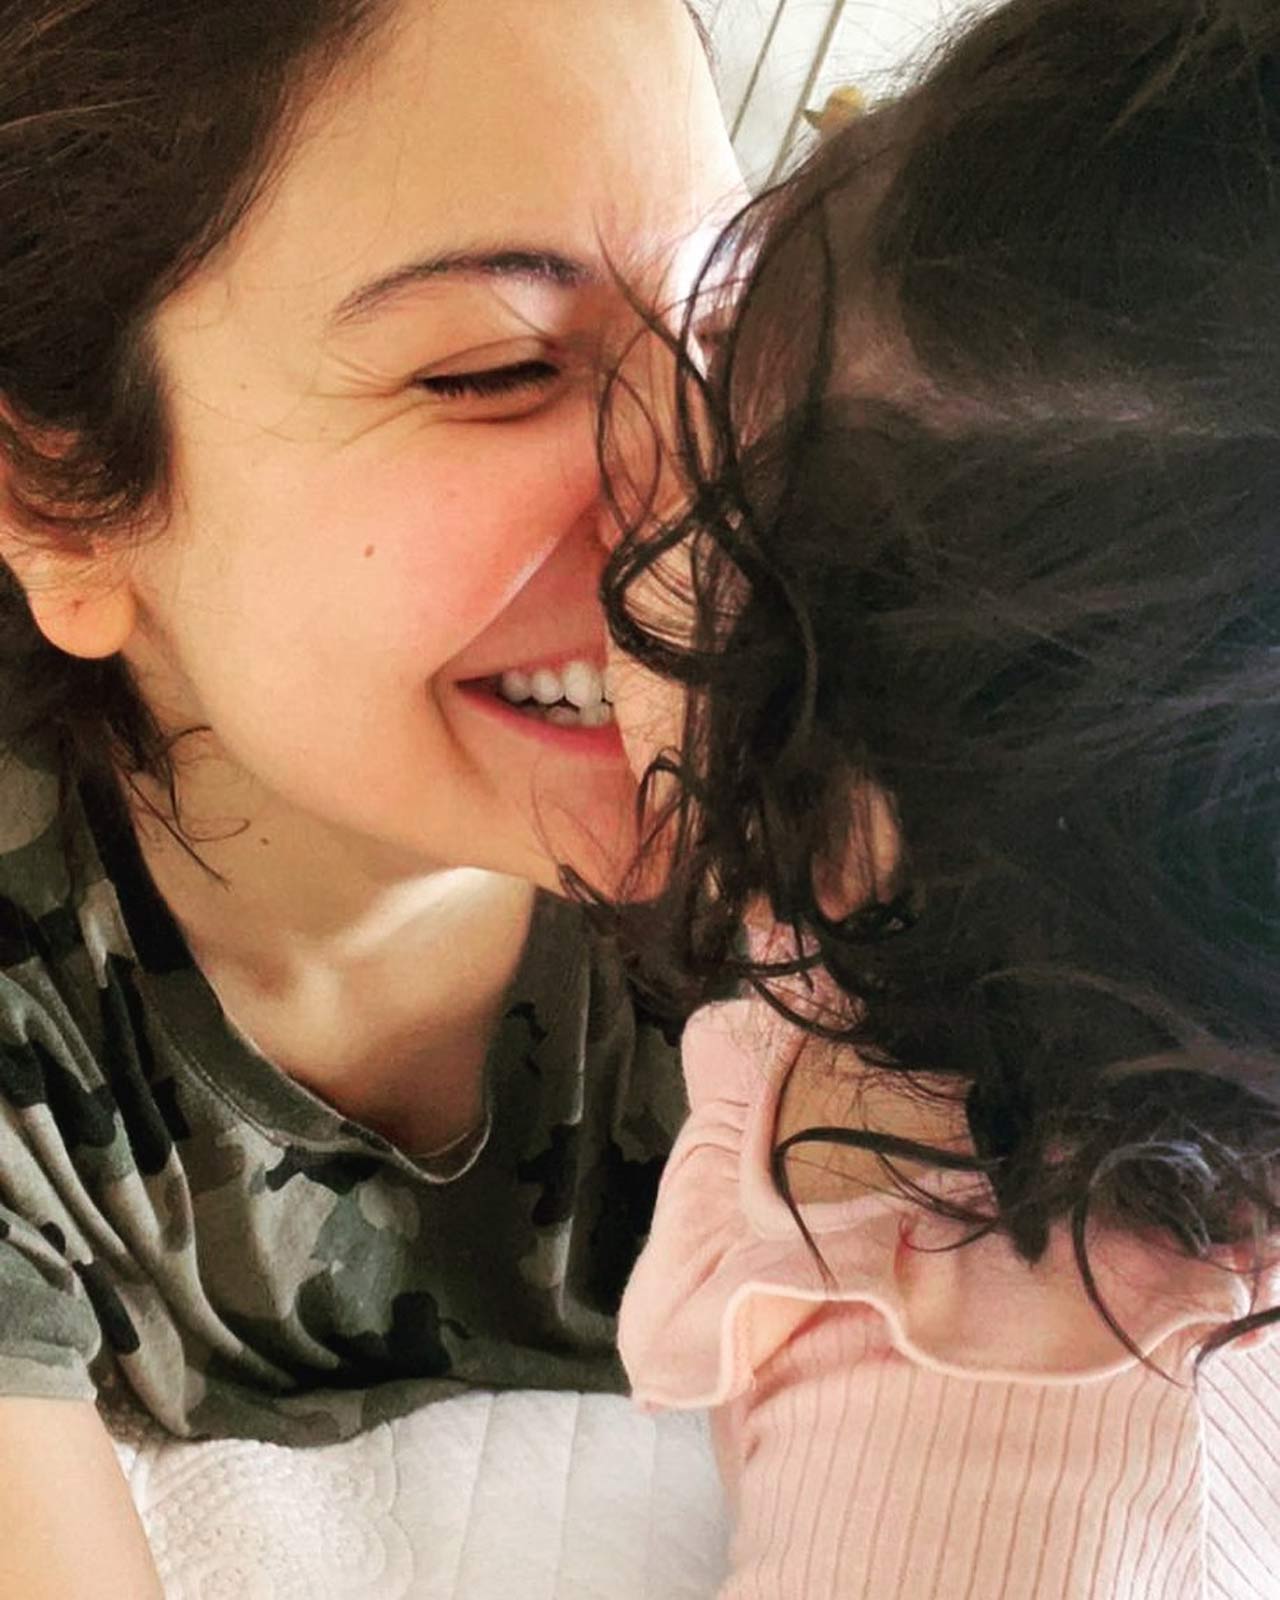 Anushka Sharma and Virat Kohli welcomed their baby girl earlier this year. The duo announced the news to their fans on social media and asked everyone to give them and their new addition in the family some privacy. In fact, Anushka has also applauded paparazzi for not clicking their pictures with the baby girl. Sharing this post on social media, Anushka wrote, 